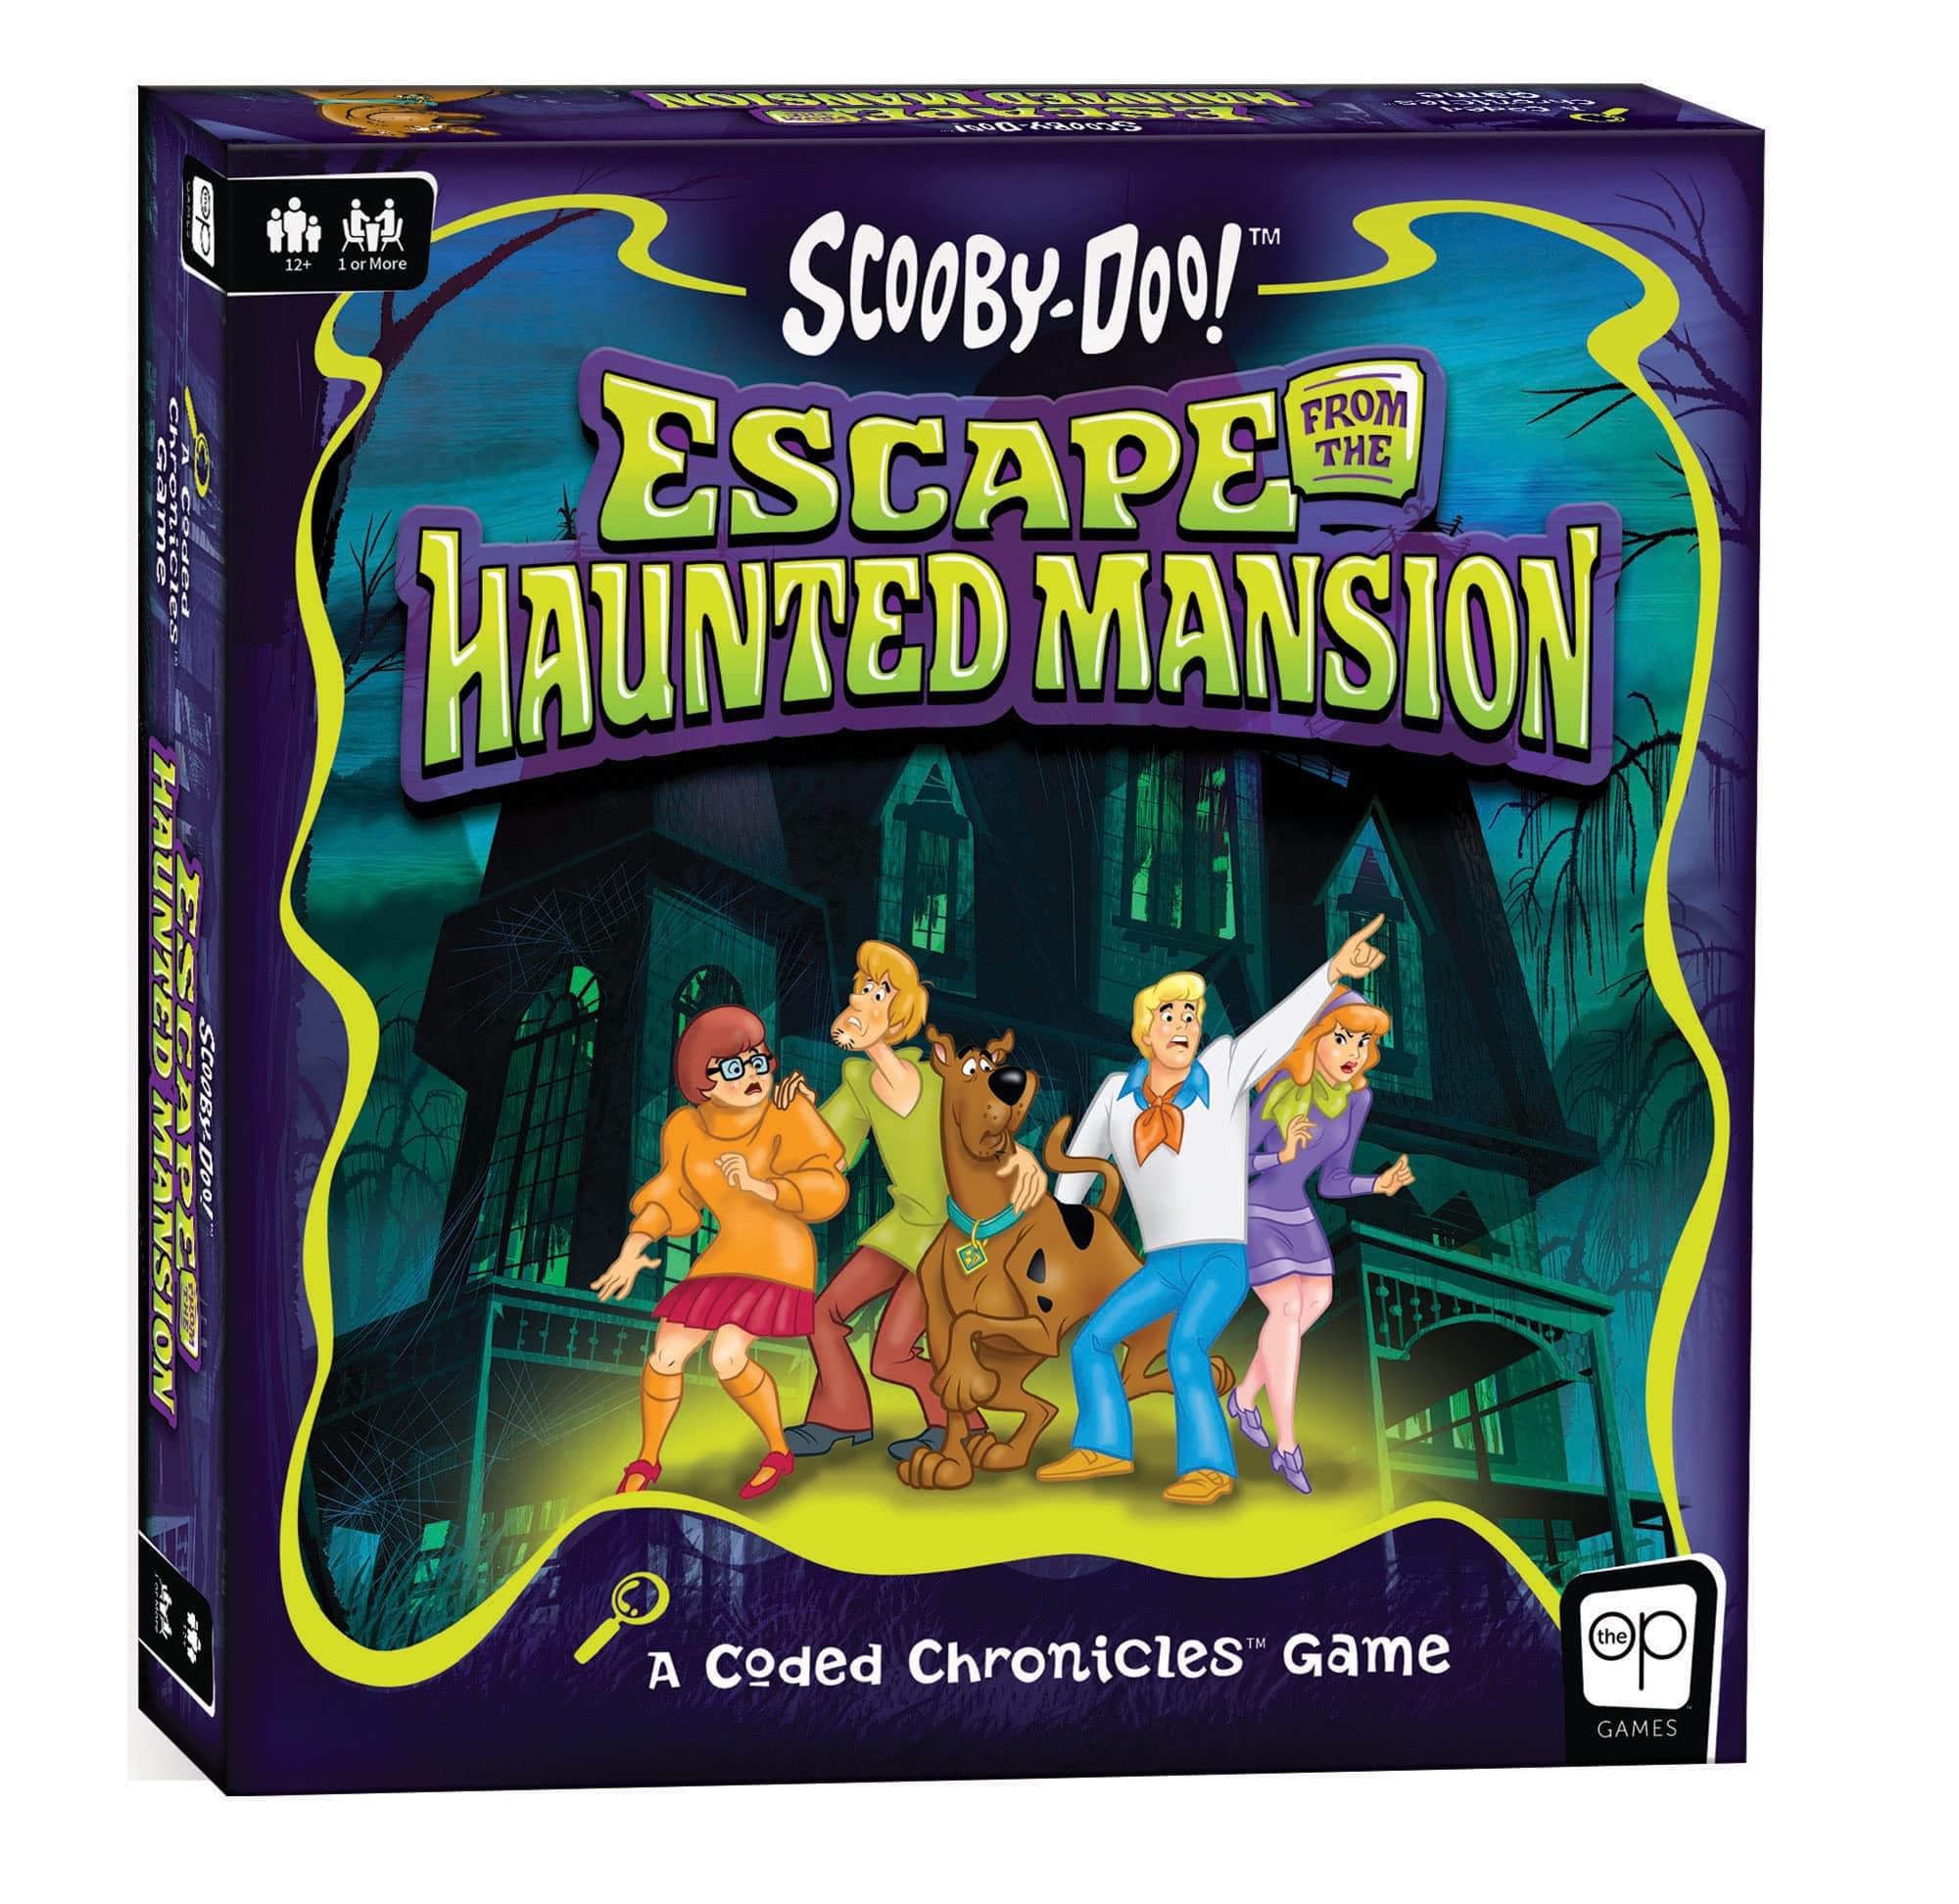 Usaopoly Board Games Usaopoly Coded Chronicles: Scooby-Doo: Escape from the Haunted Mansion